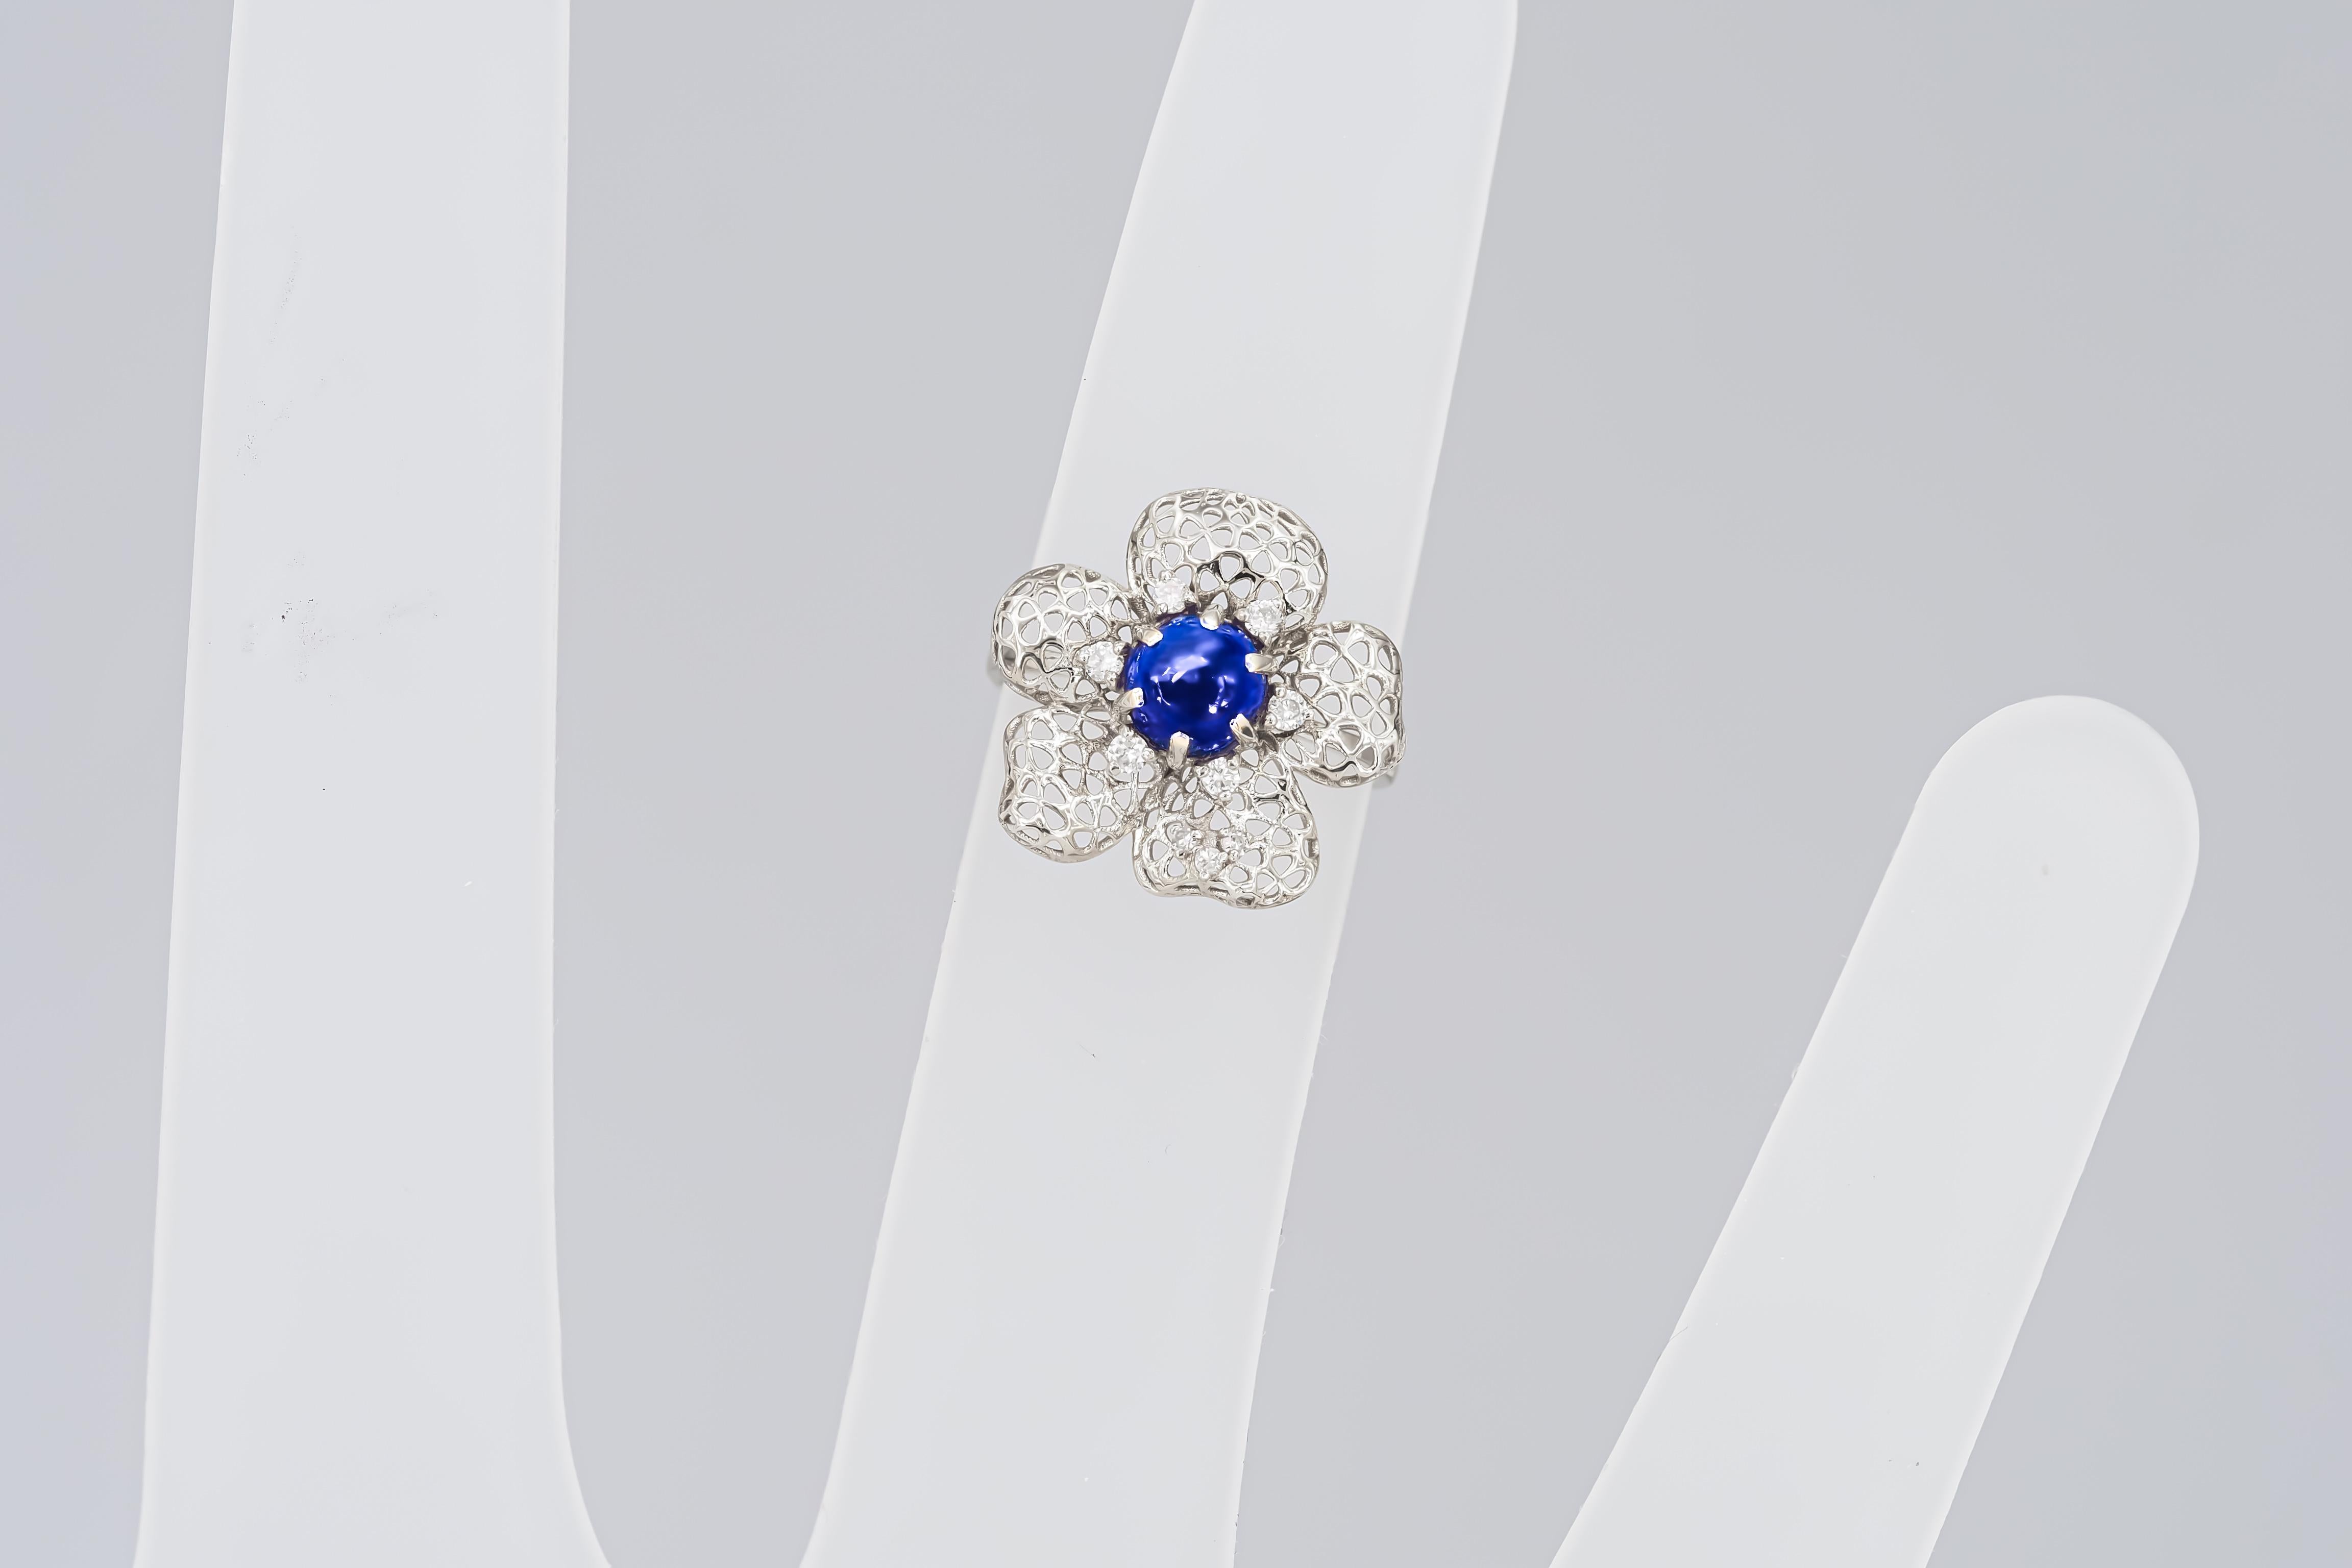 Flower ring with blue sapphire cabohon in 14k gold

Weight: 2.51 g.
Gold - 14 kt gold marked

Central stone: Sapphire
Cut: Round cabochon
Weight: approx 1.30 ct.
Color: Sapphire
Clarity: Transparent with inclusions.
Side stones:  
White topazes: